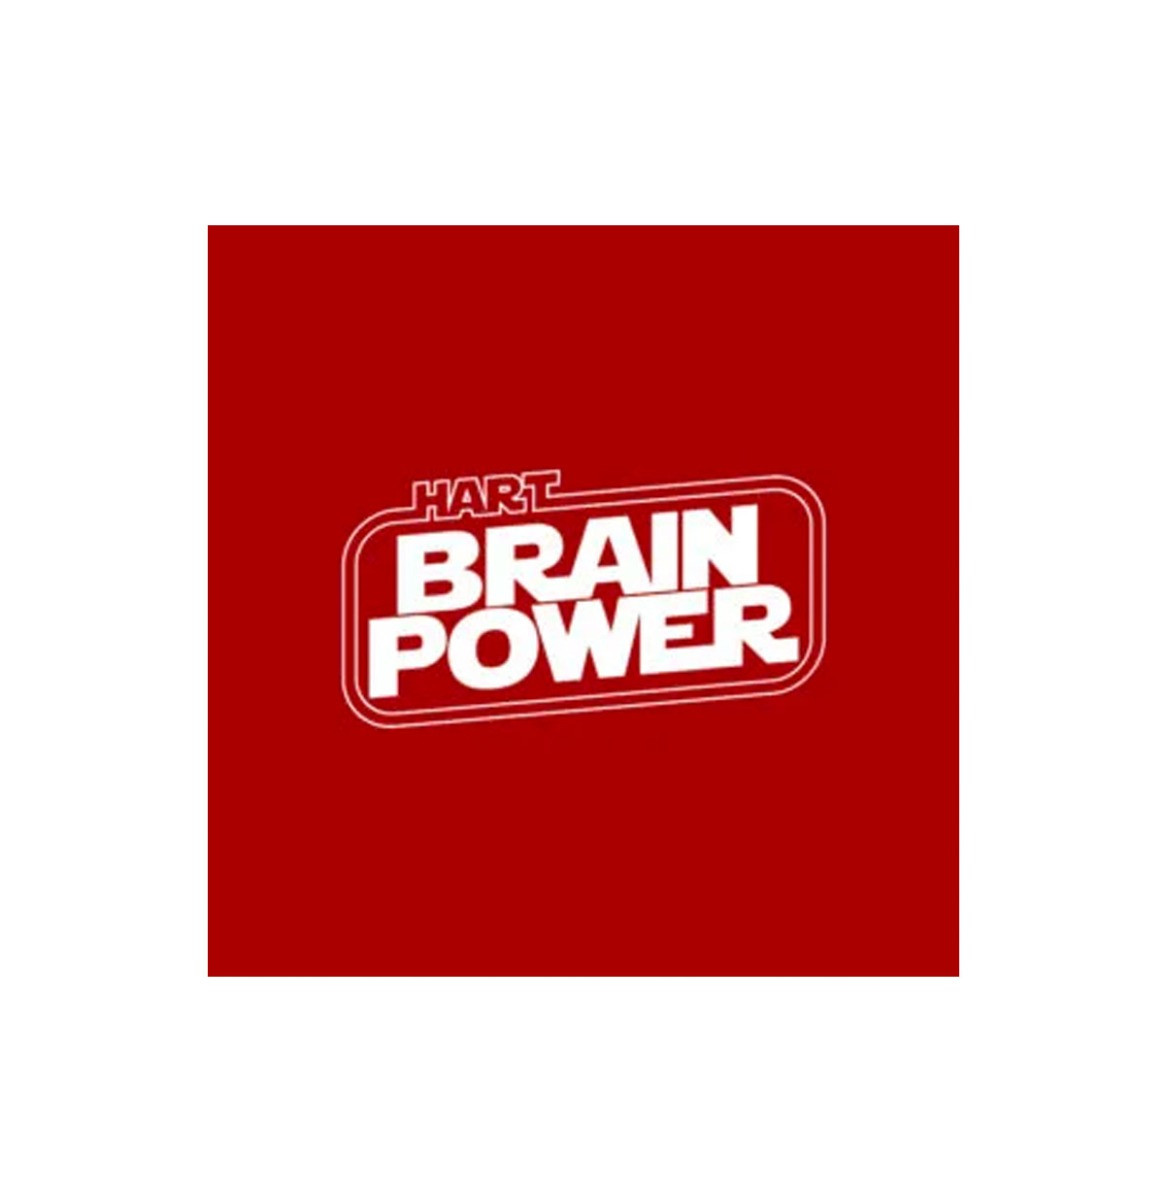 Brainpower - Hart (Brainiac Bars Edition) 2LP (Record Store Day 2022) Flamin' Fire Bars & Smooth Sunset colored